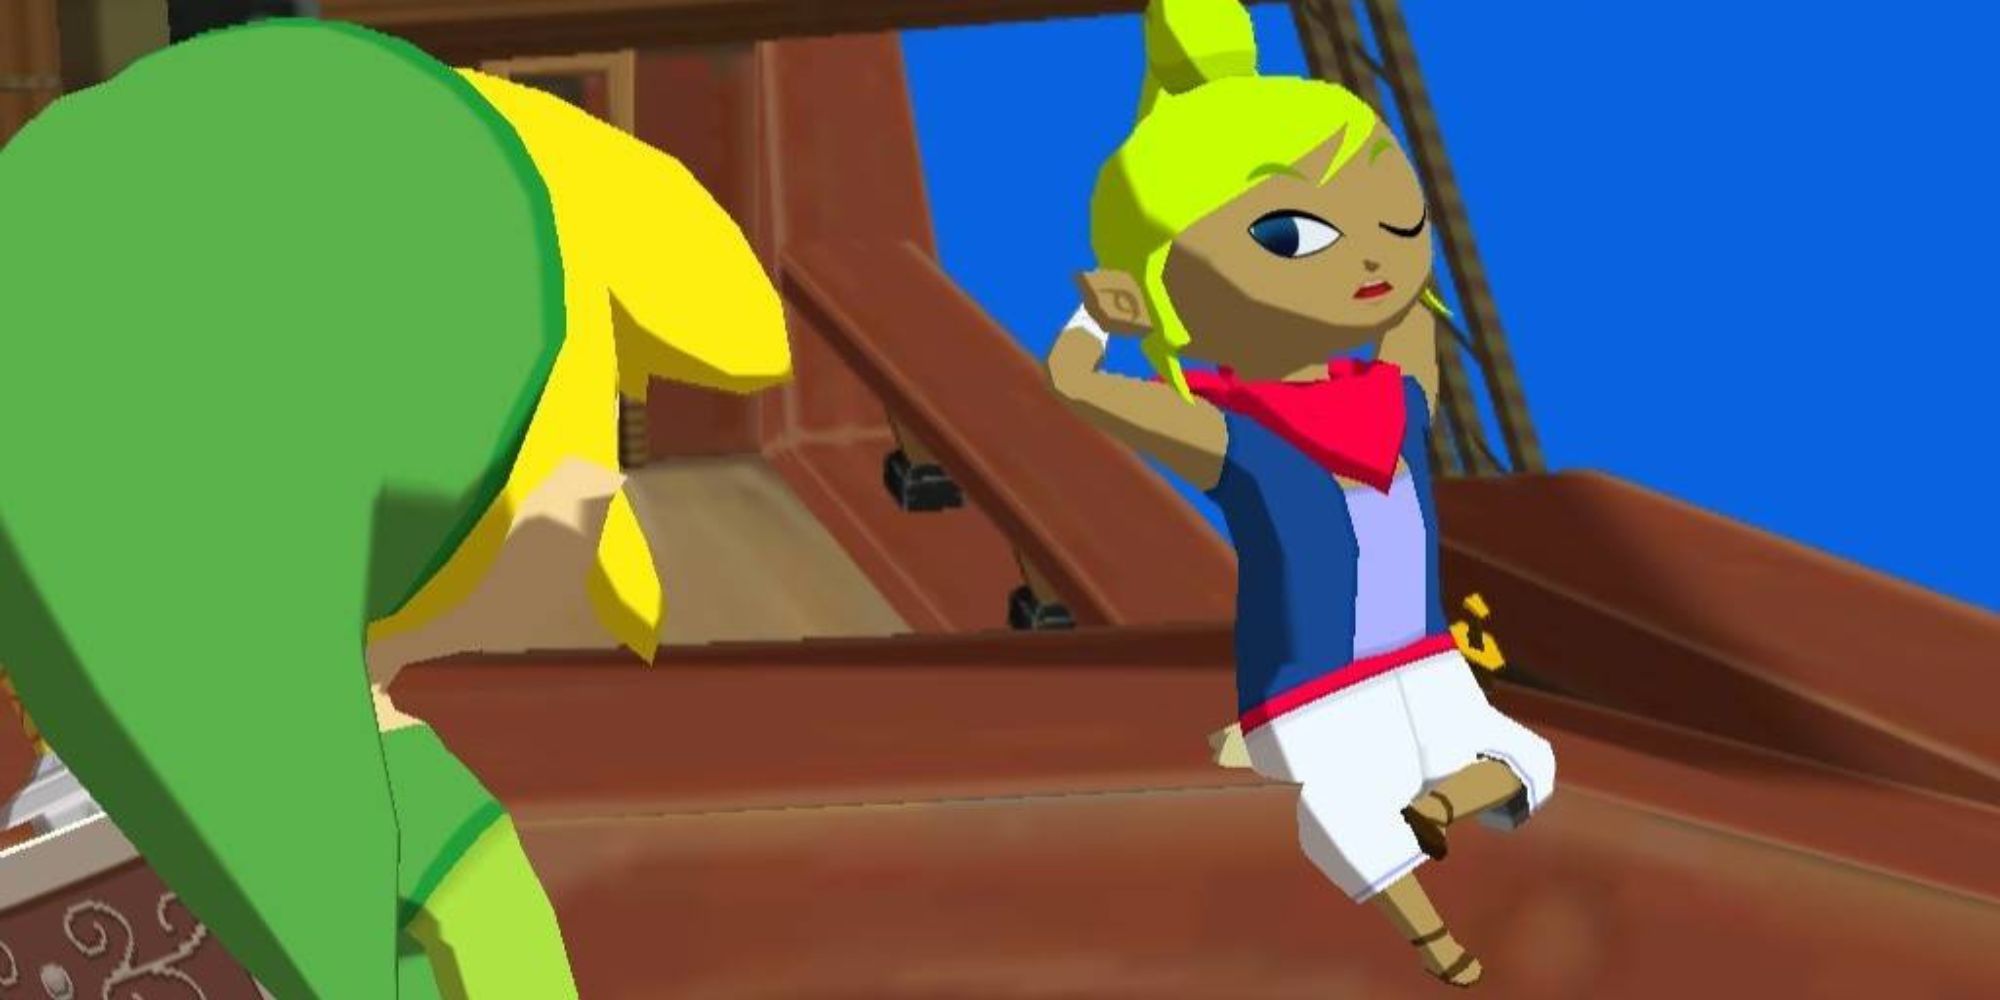 Tetra looking at Link with one eye on her boat in The Legend of Zelda: The Wind Waker